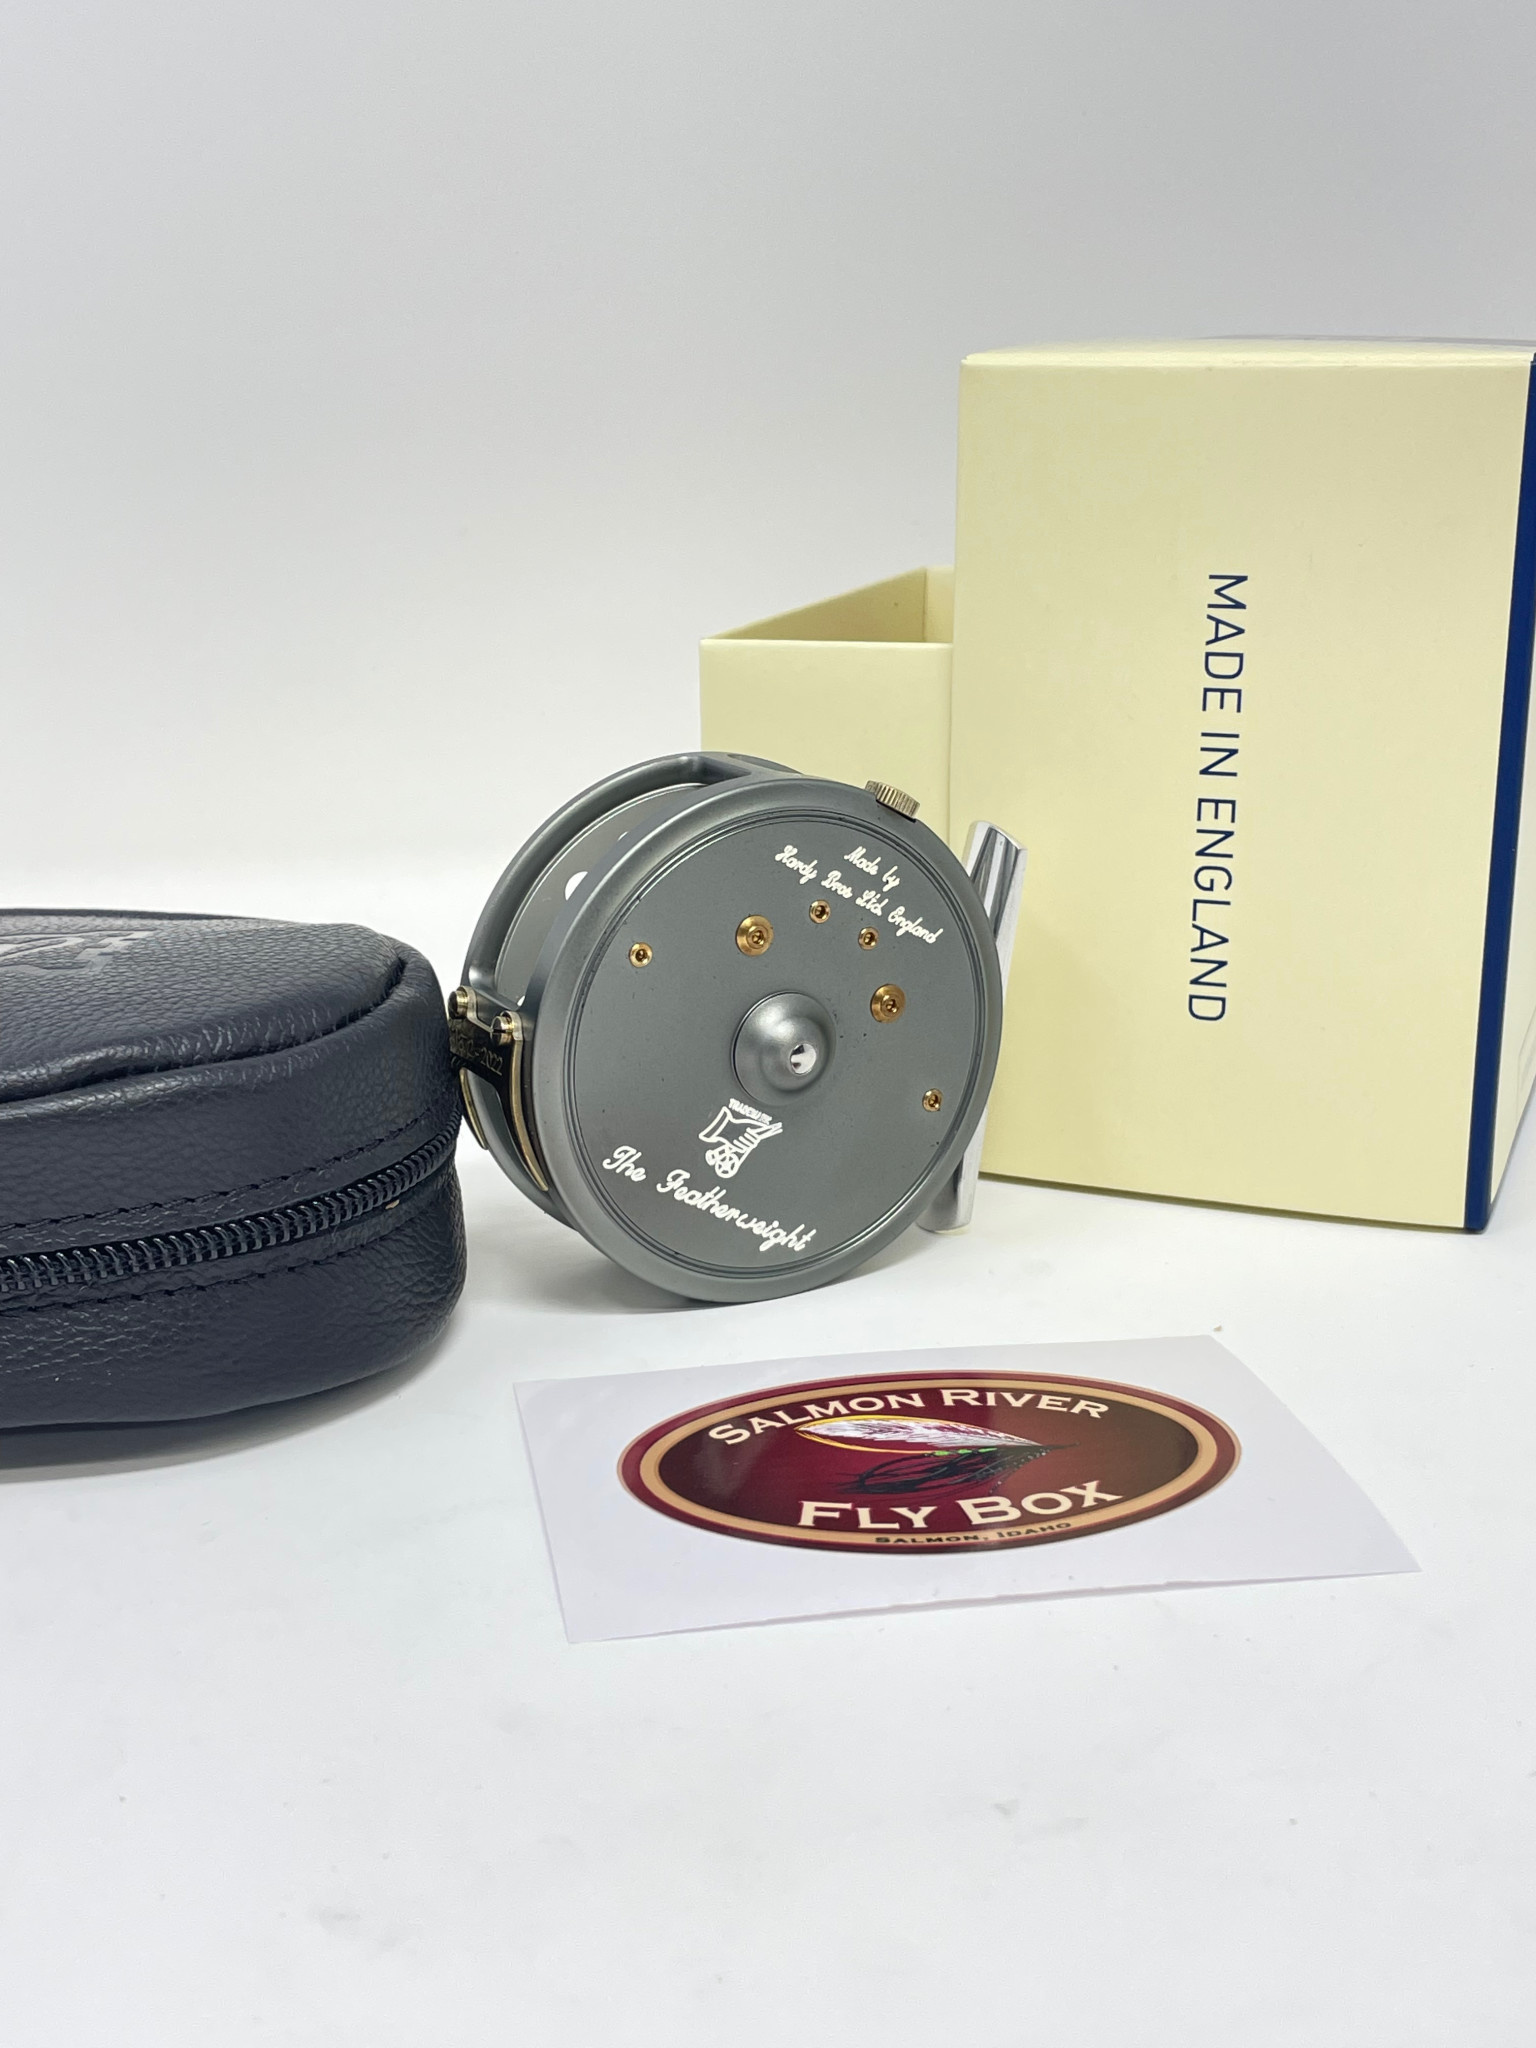 Hardy Featherweight 150th Anniversary Reel - Salmon River Fly Box